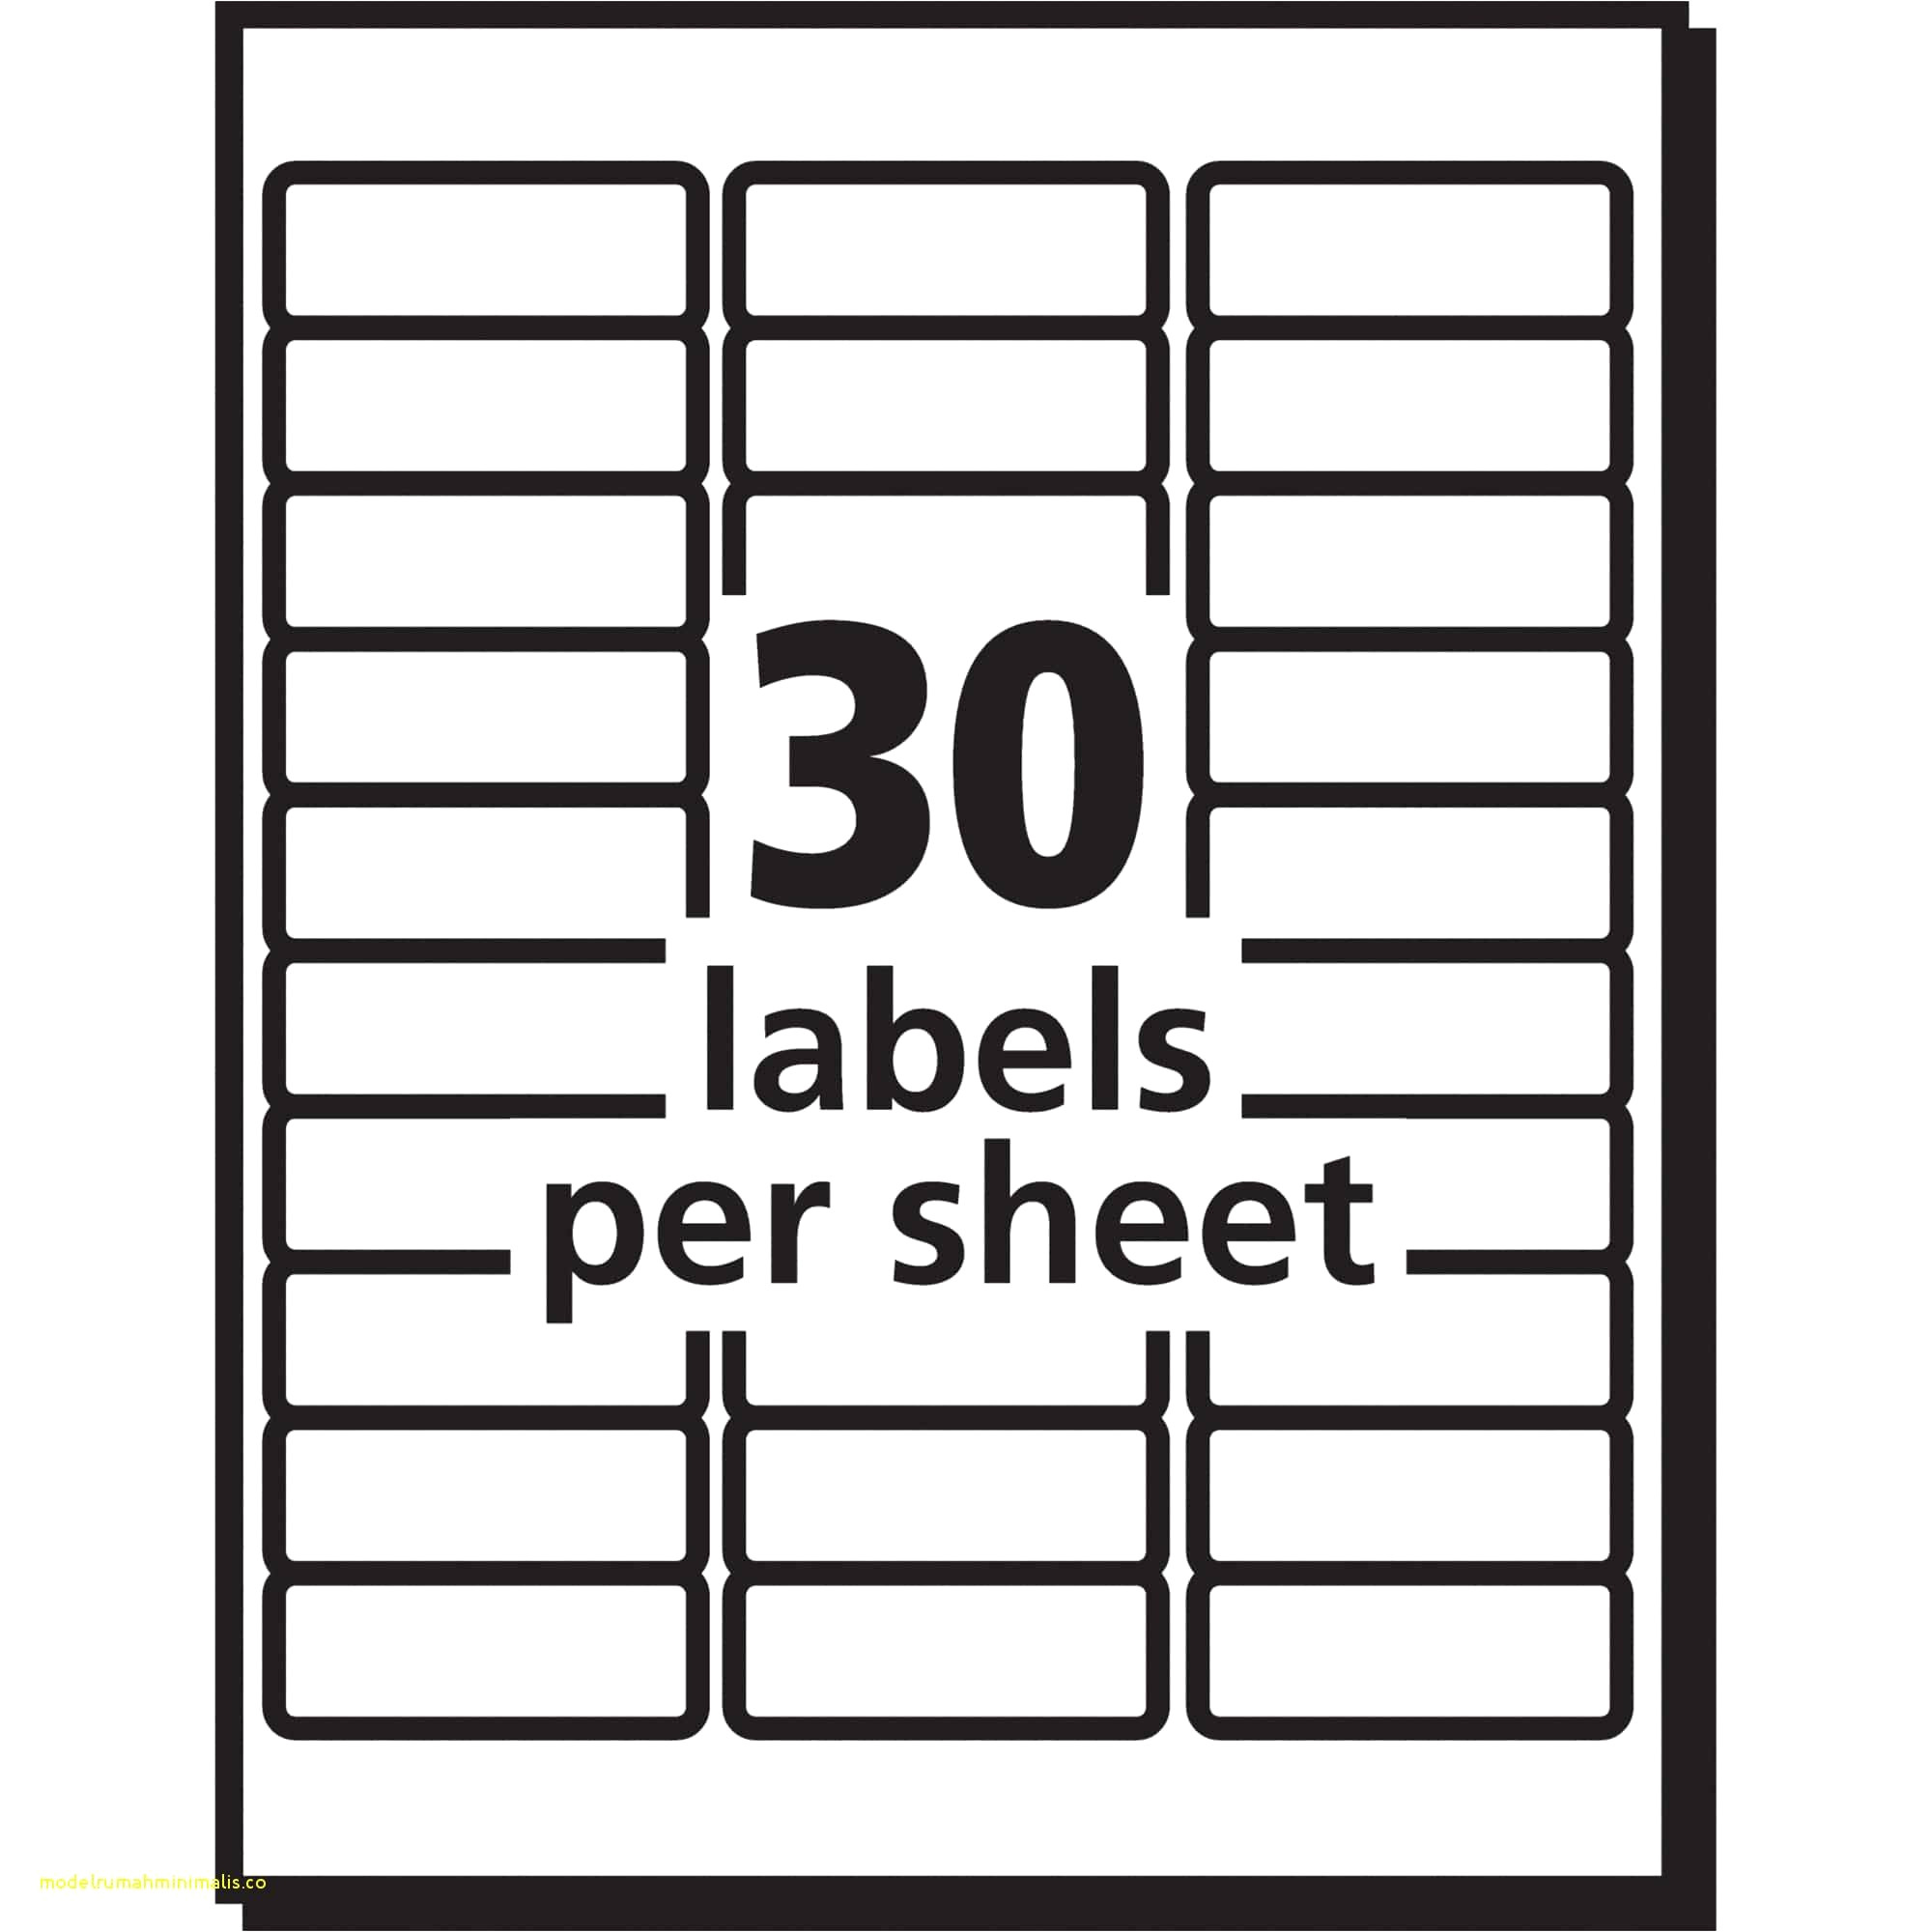 avery label 5630 printed outside template word